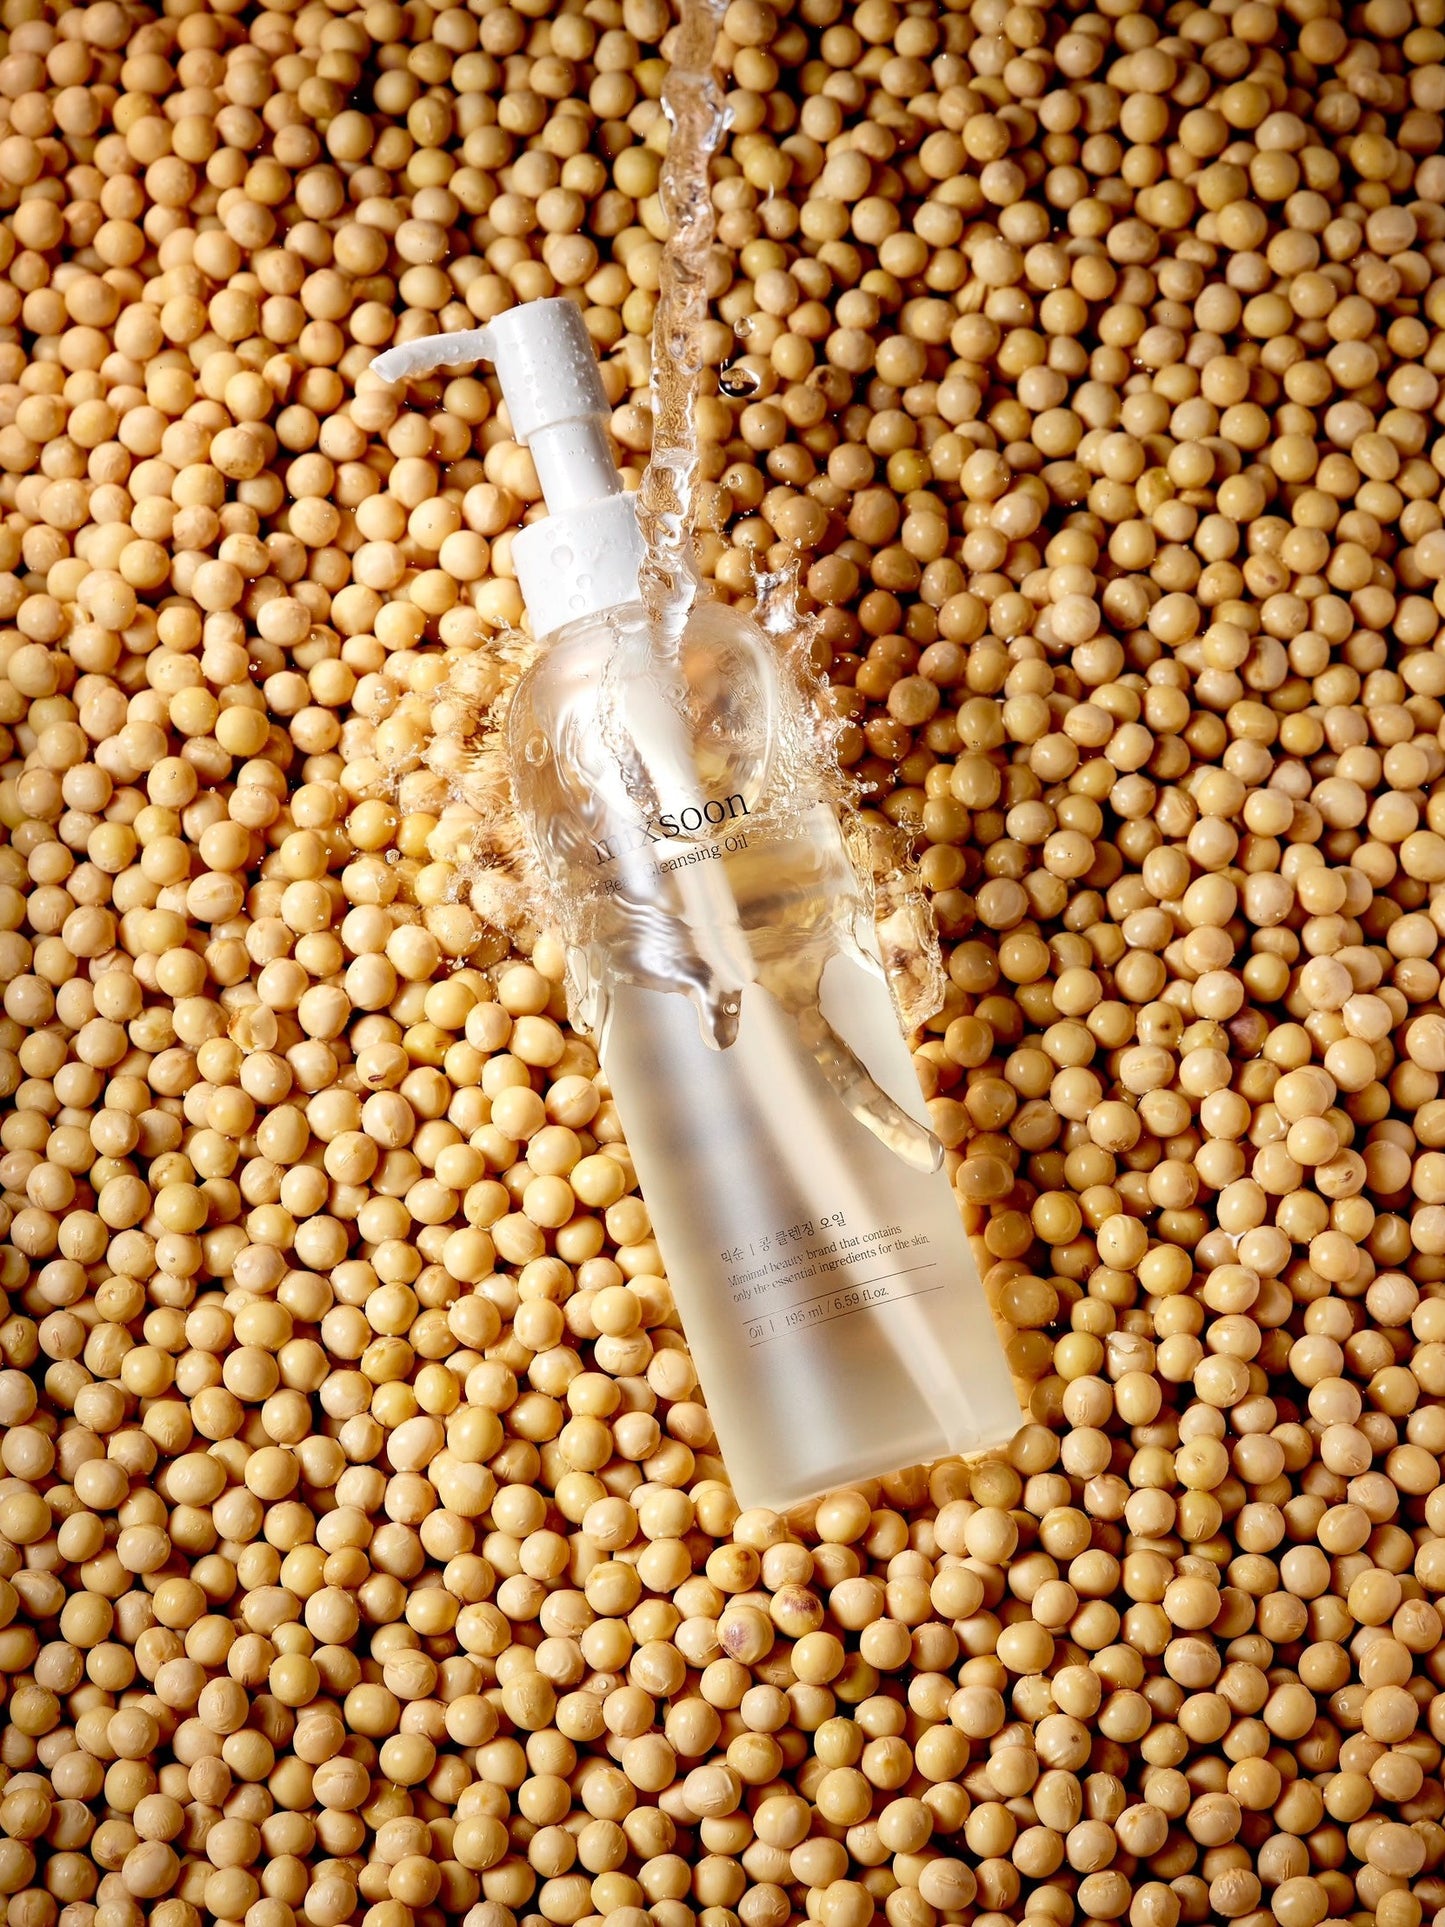 mixsoon Bean Cleansing Oil